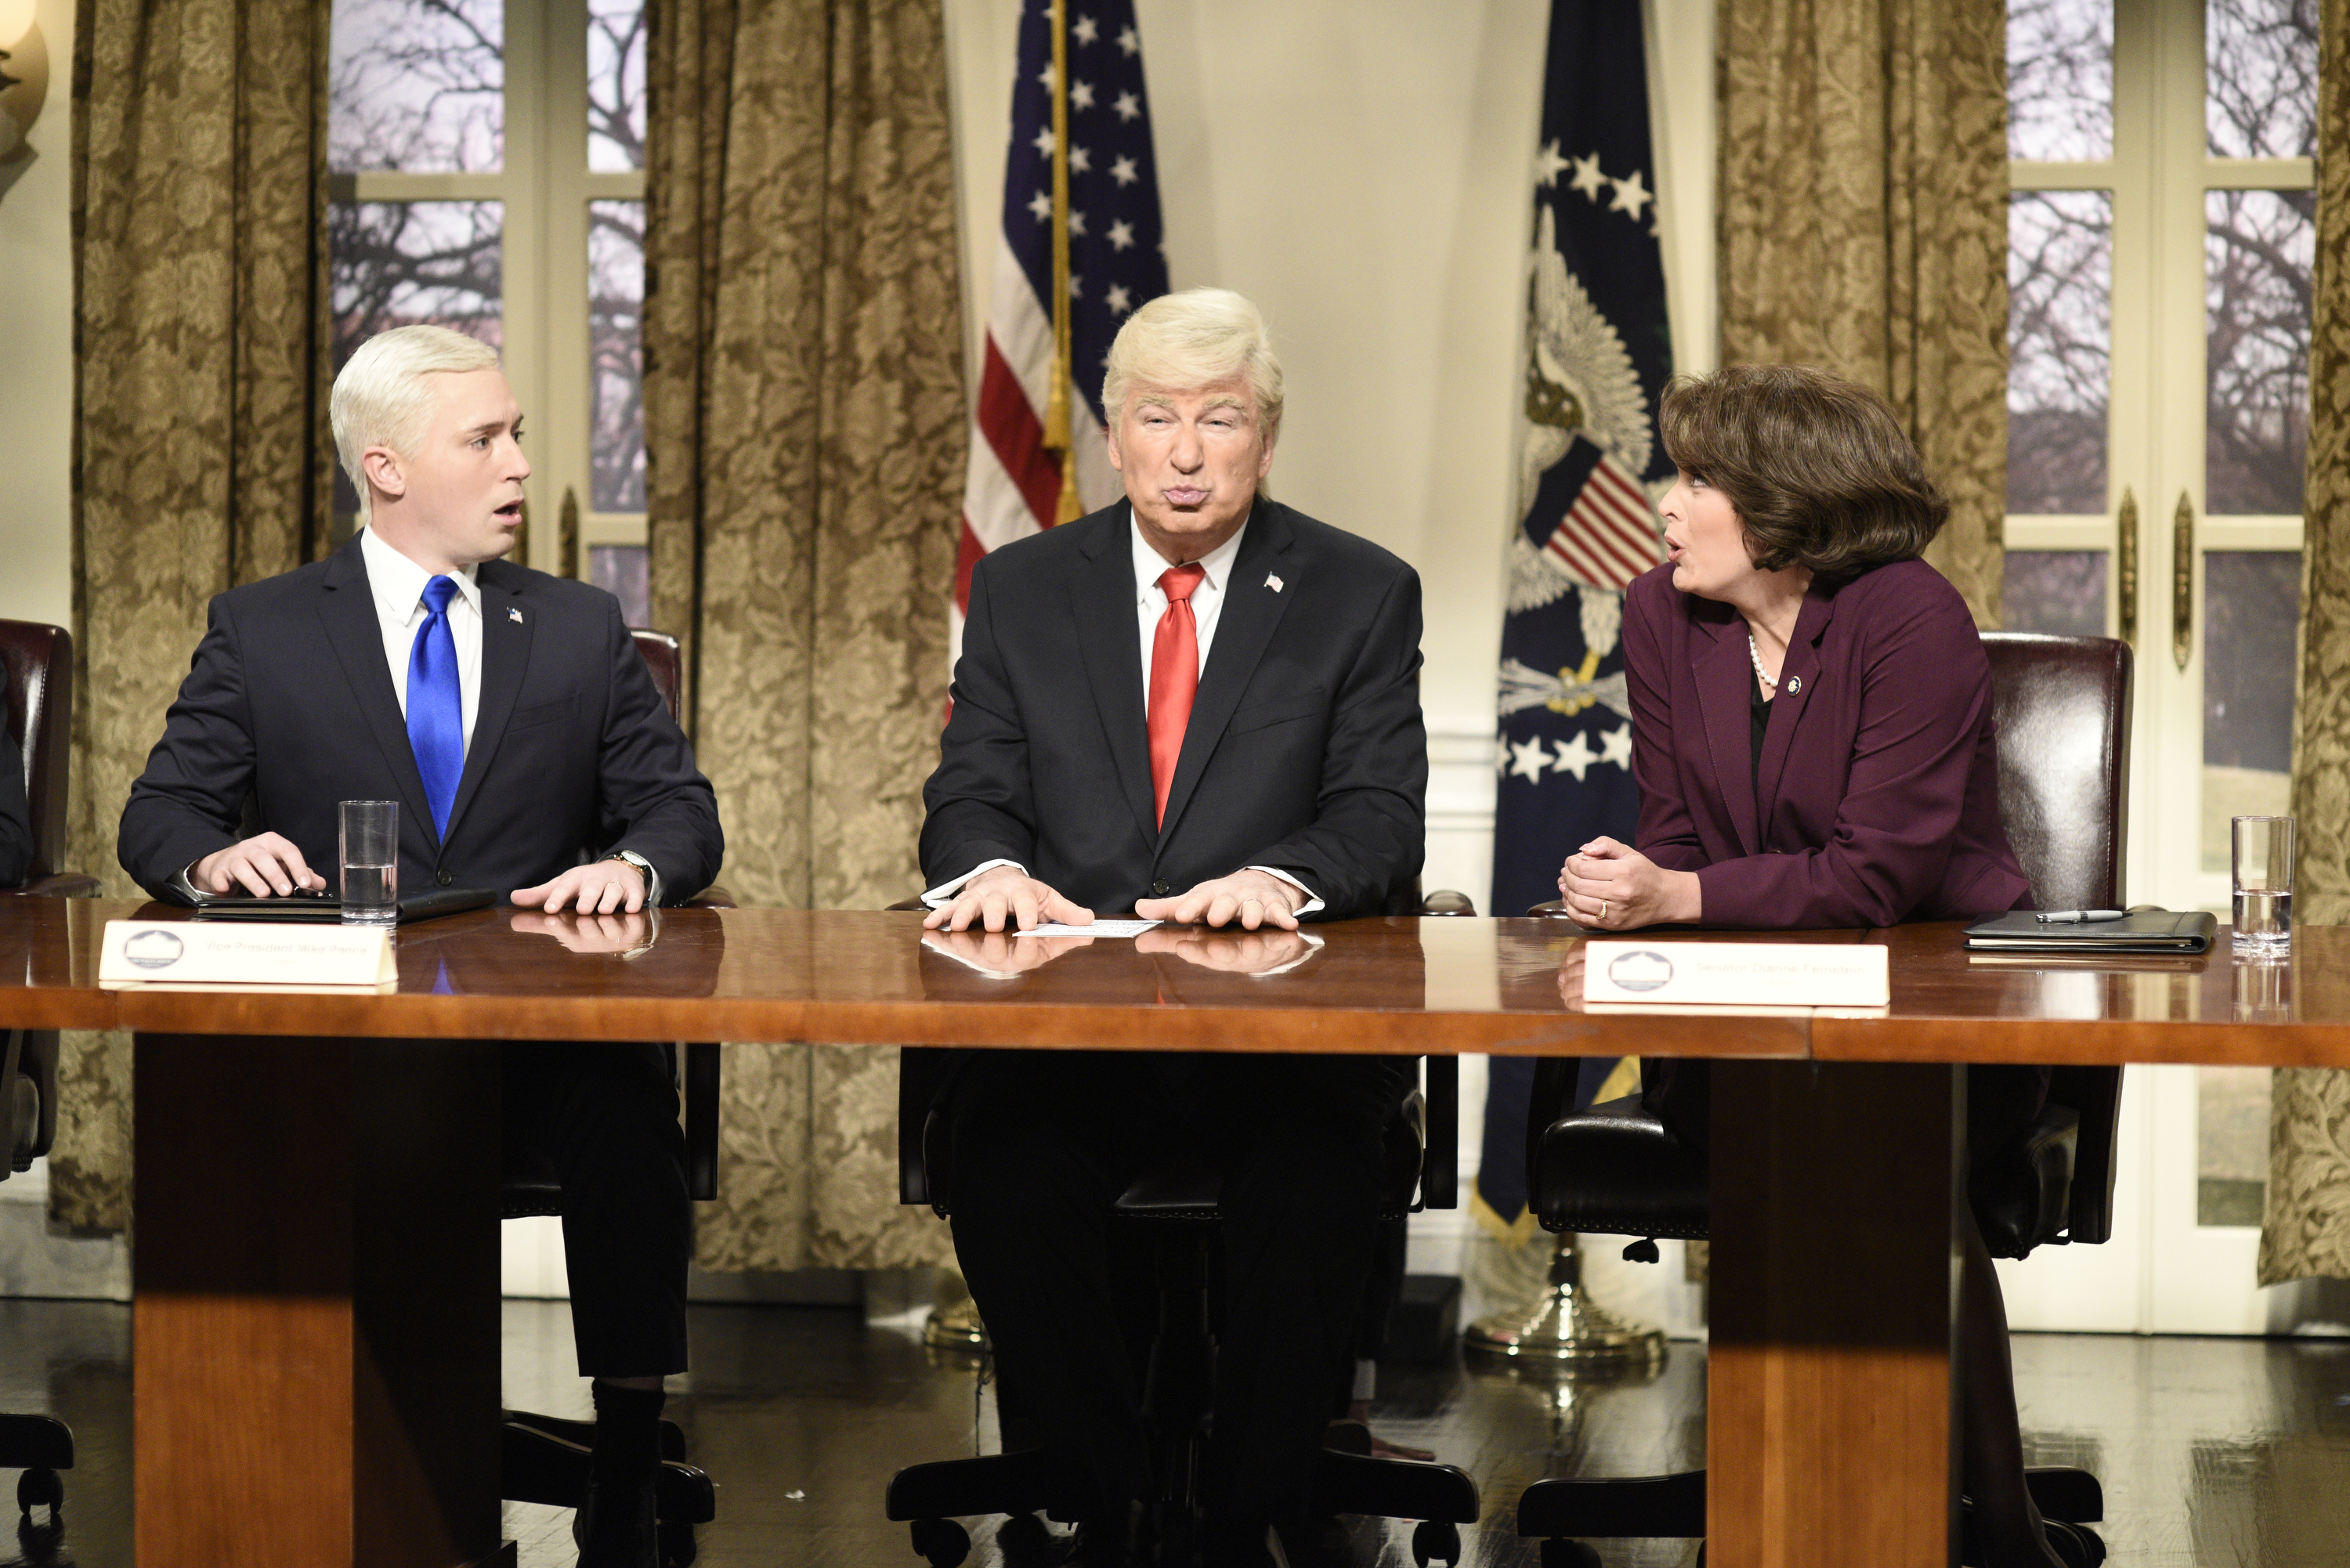 Beck Bennett as Vice President Mike Pence, Alec Baldwin as President Donald J. Trump, Cecily Strong as Senator Dianne Feinstein during the 